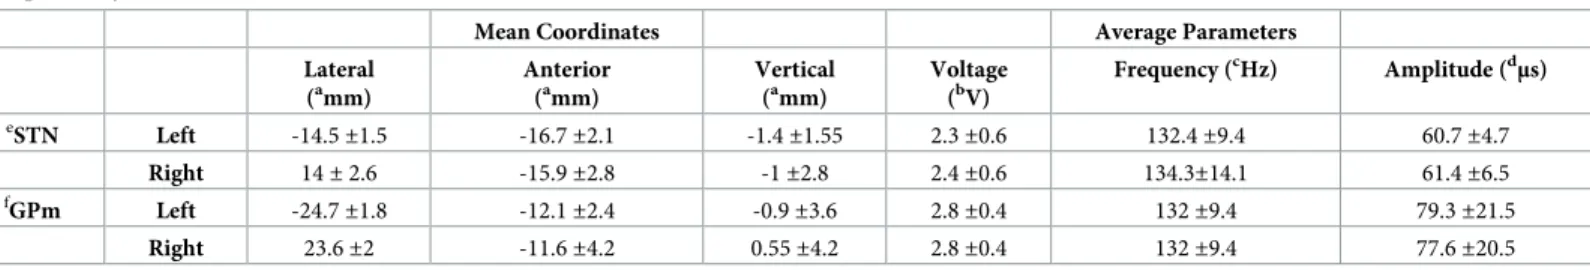 Table 2. Mean (± standard deviation) coordinates and stimulation parameters of 29 patients with GPm DBS and 42 patients with STN DBS at 6 months postoperatively.